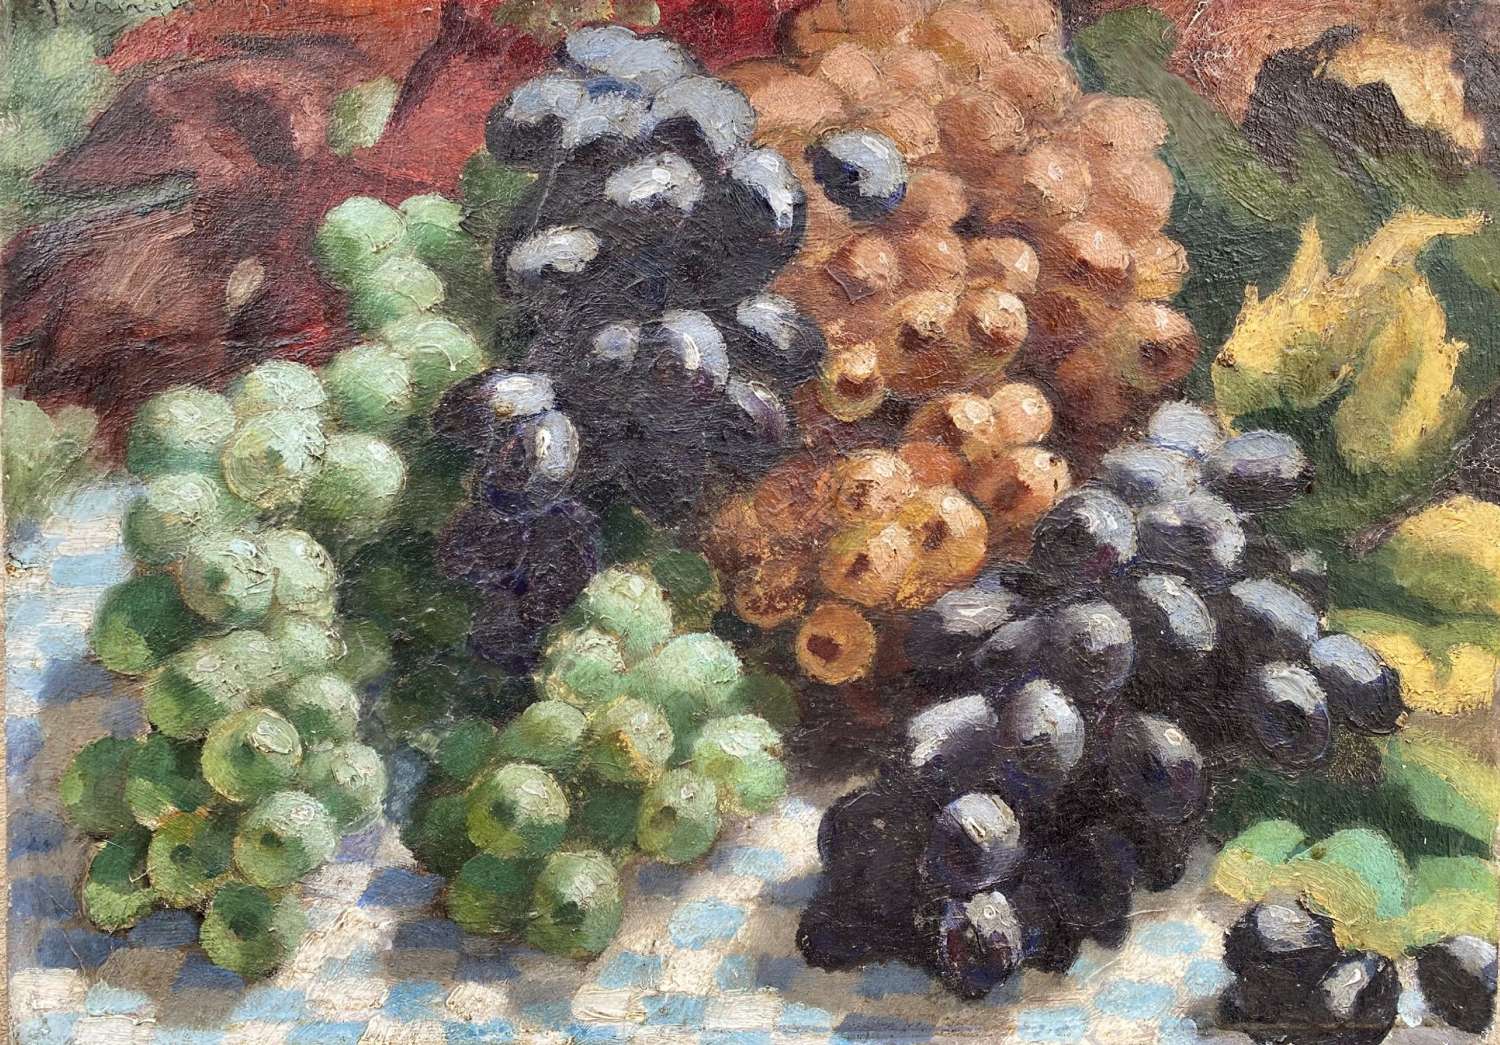 Grapes On A Chequered Tablecloth 1930 Wine And Food Lover's Still Life